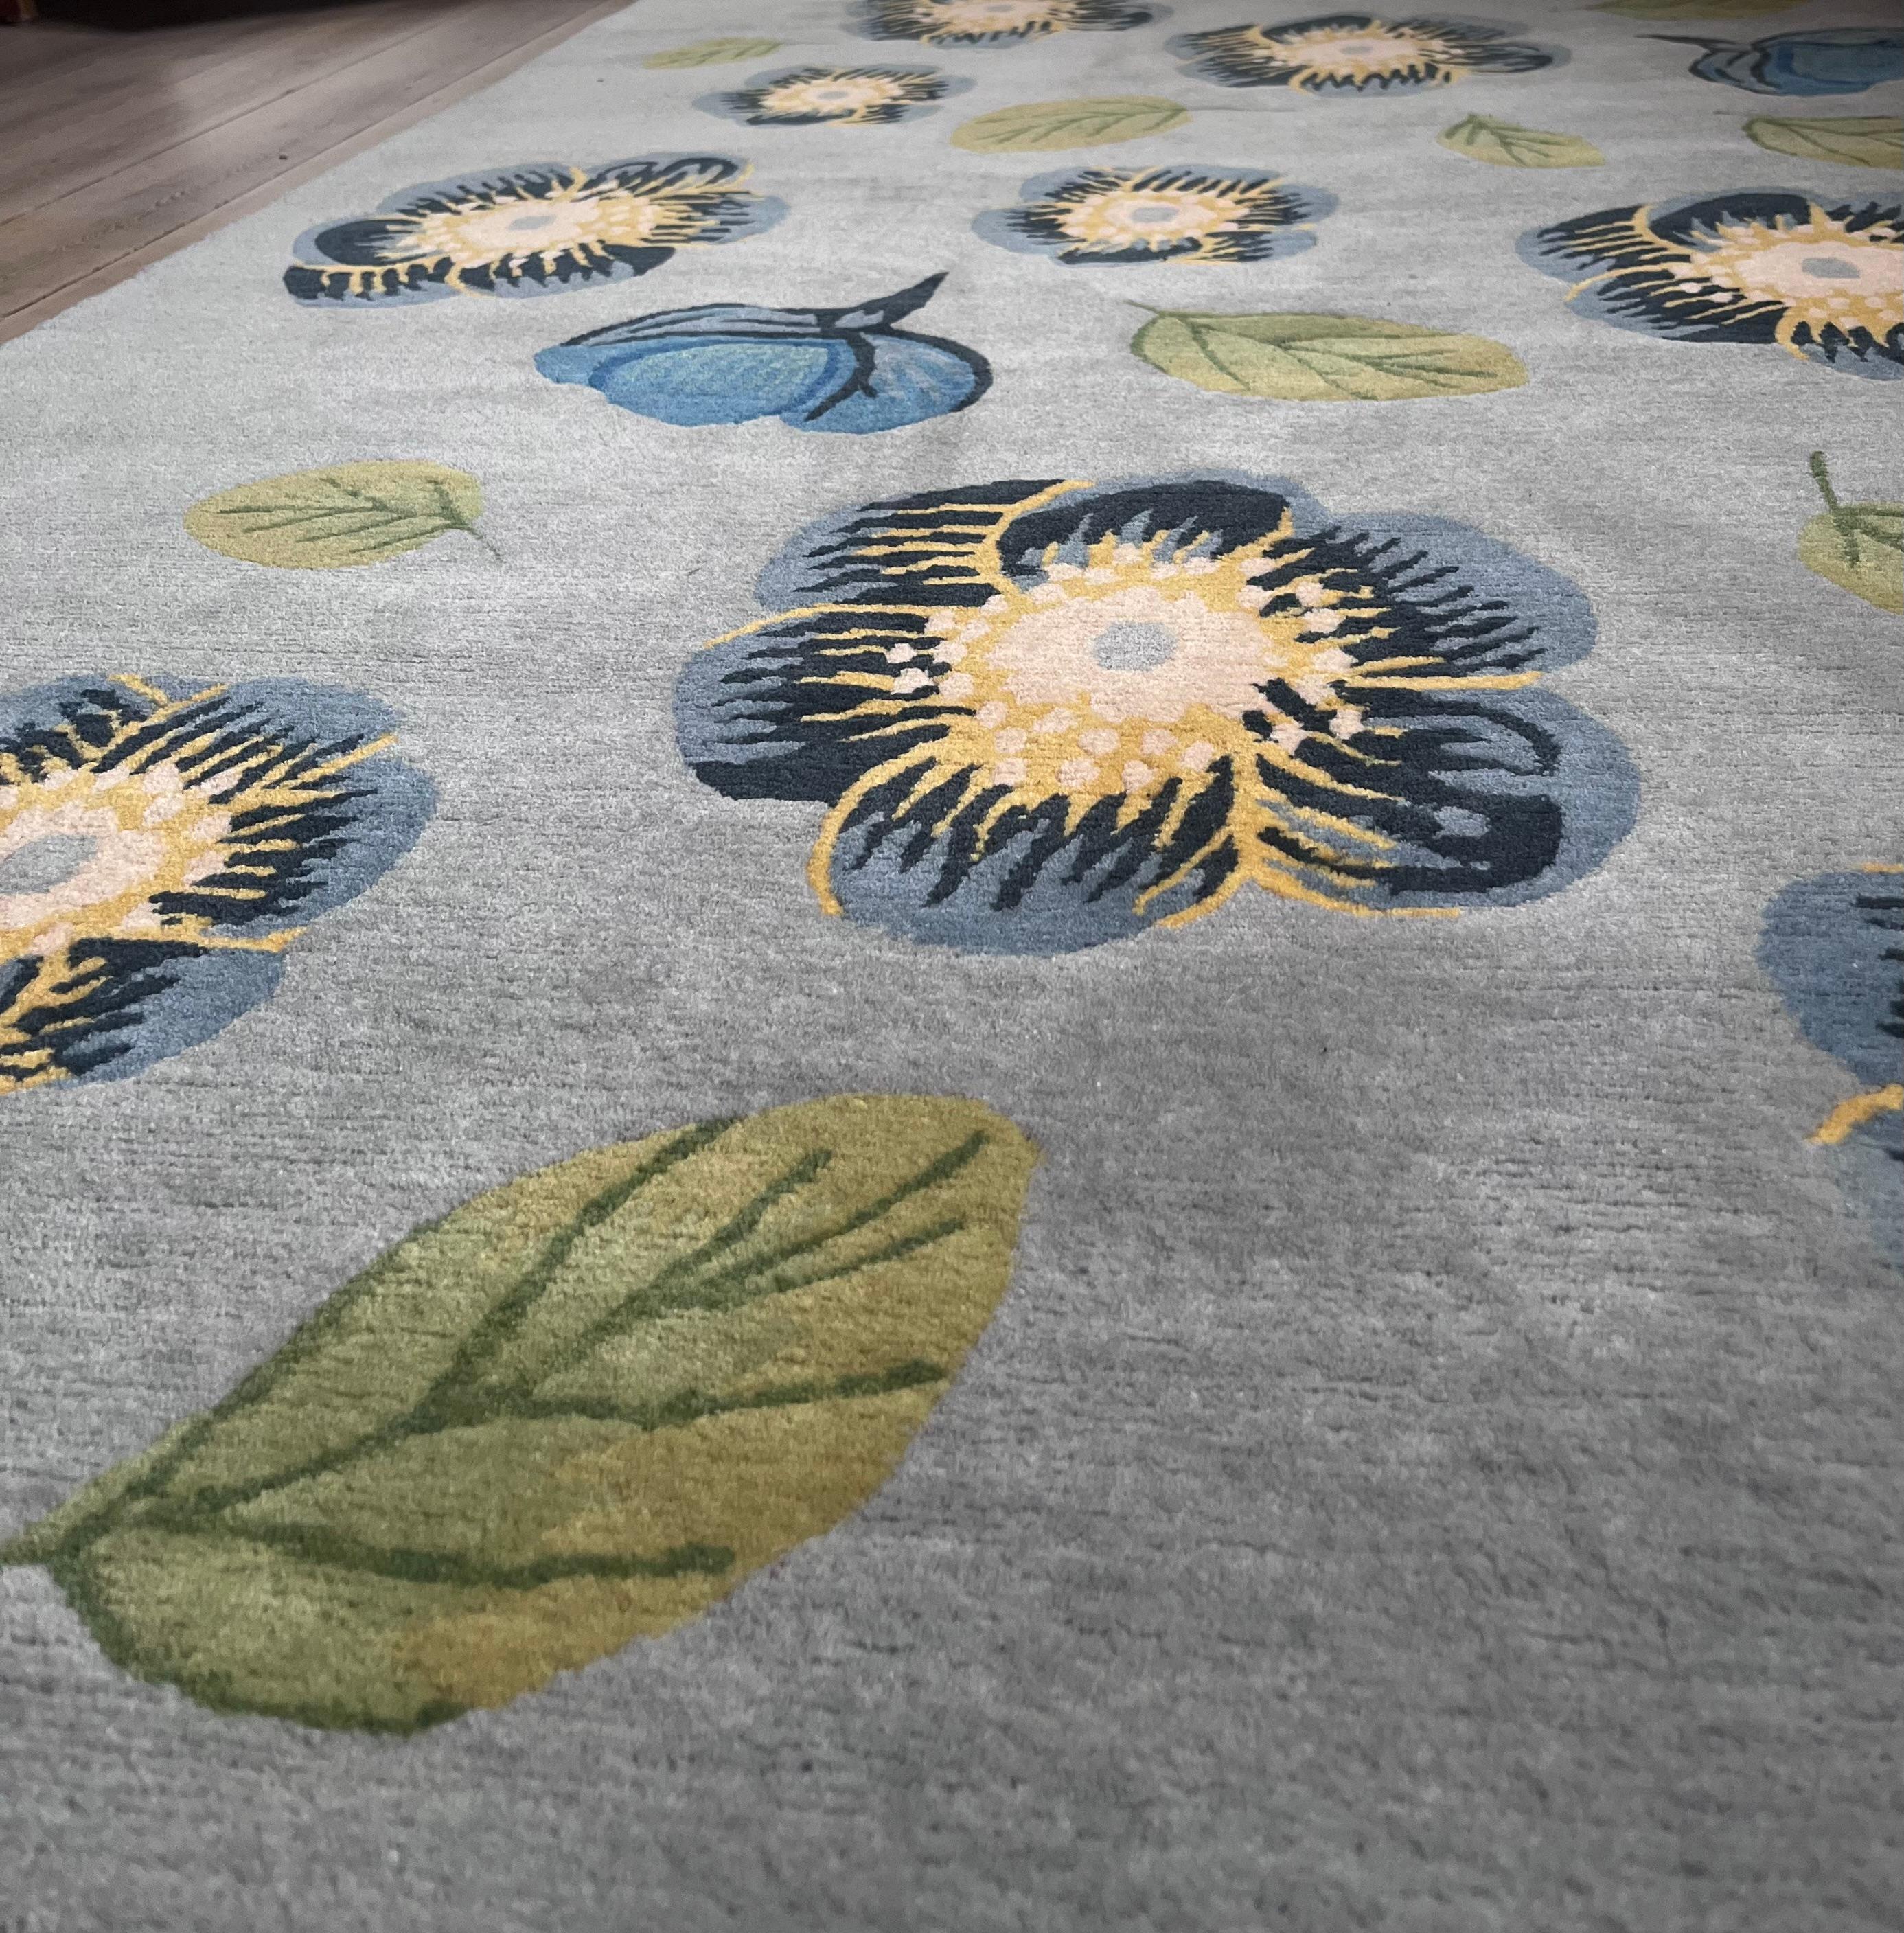 POTAGER Collection
Wild roses are the first flowers in Anna Charlotte Ateliers                                                              Potager collection—queen of all flowers full of myths and magic

Hand knotted wool on cotton warp
Design: LET